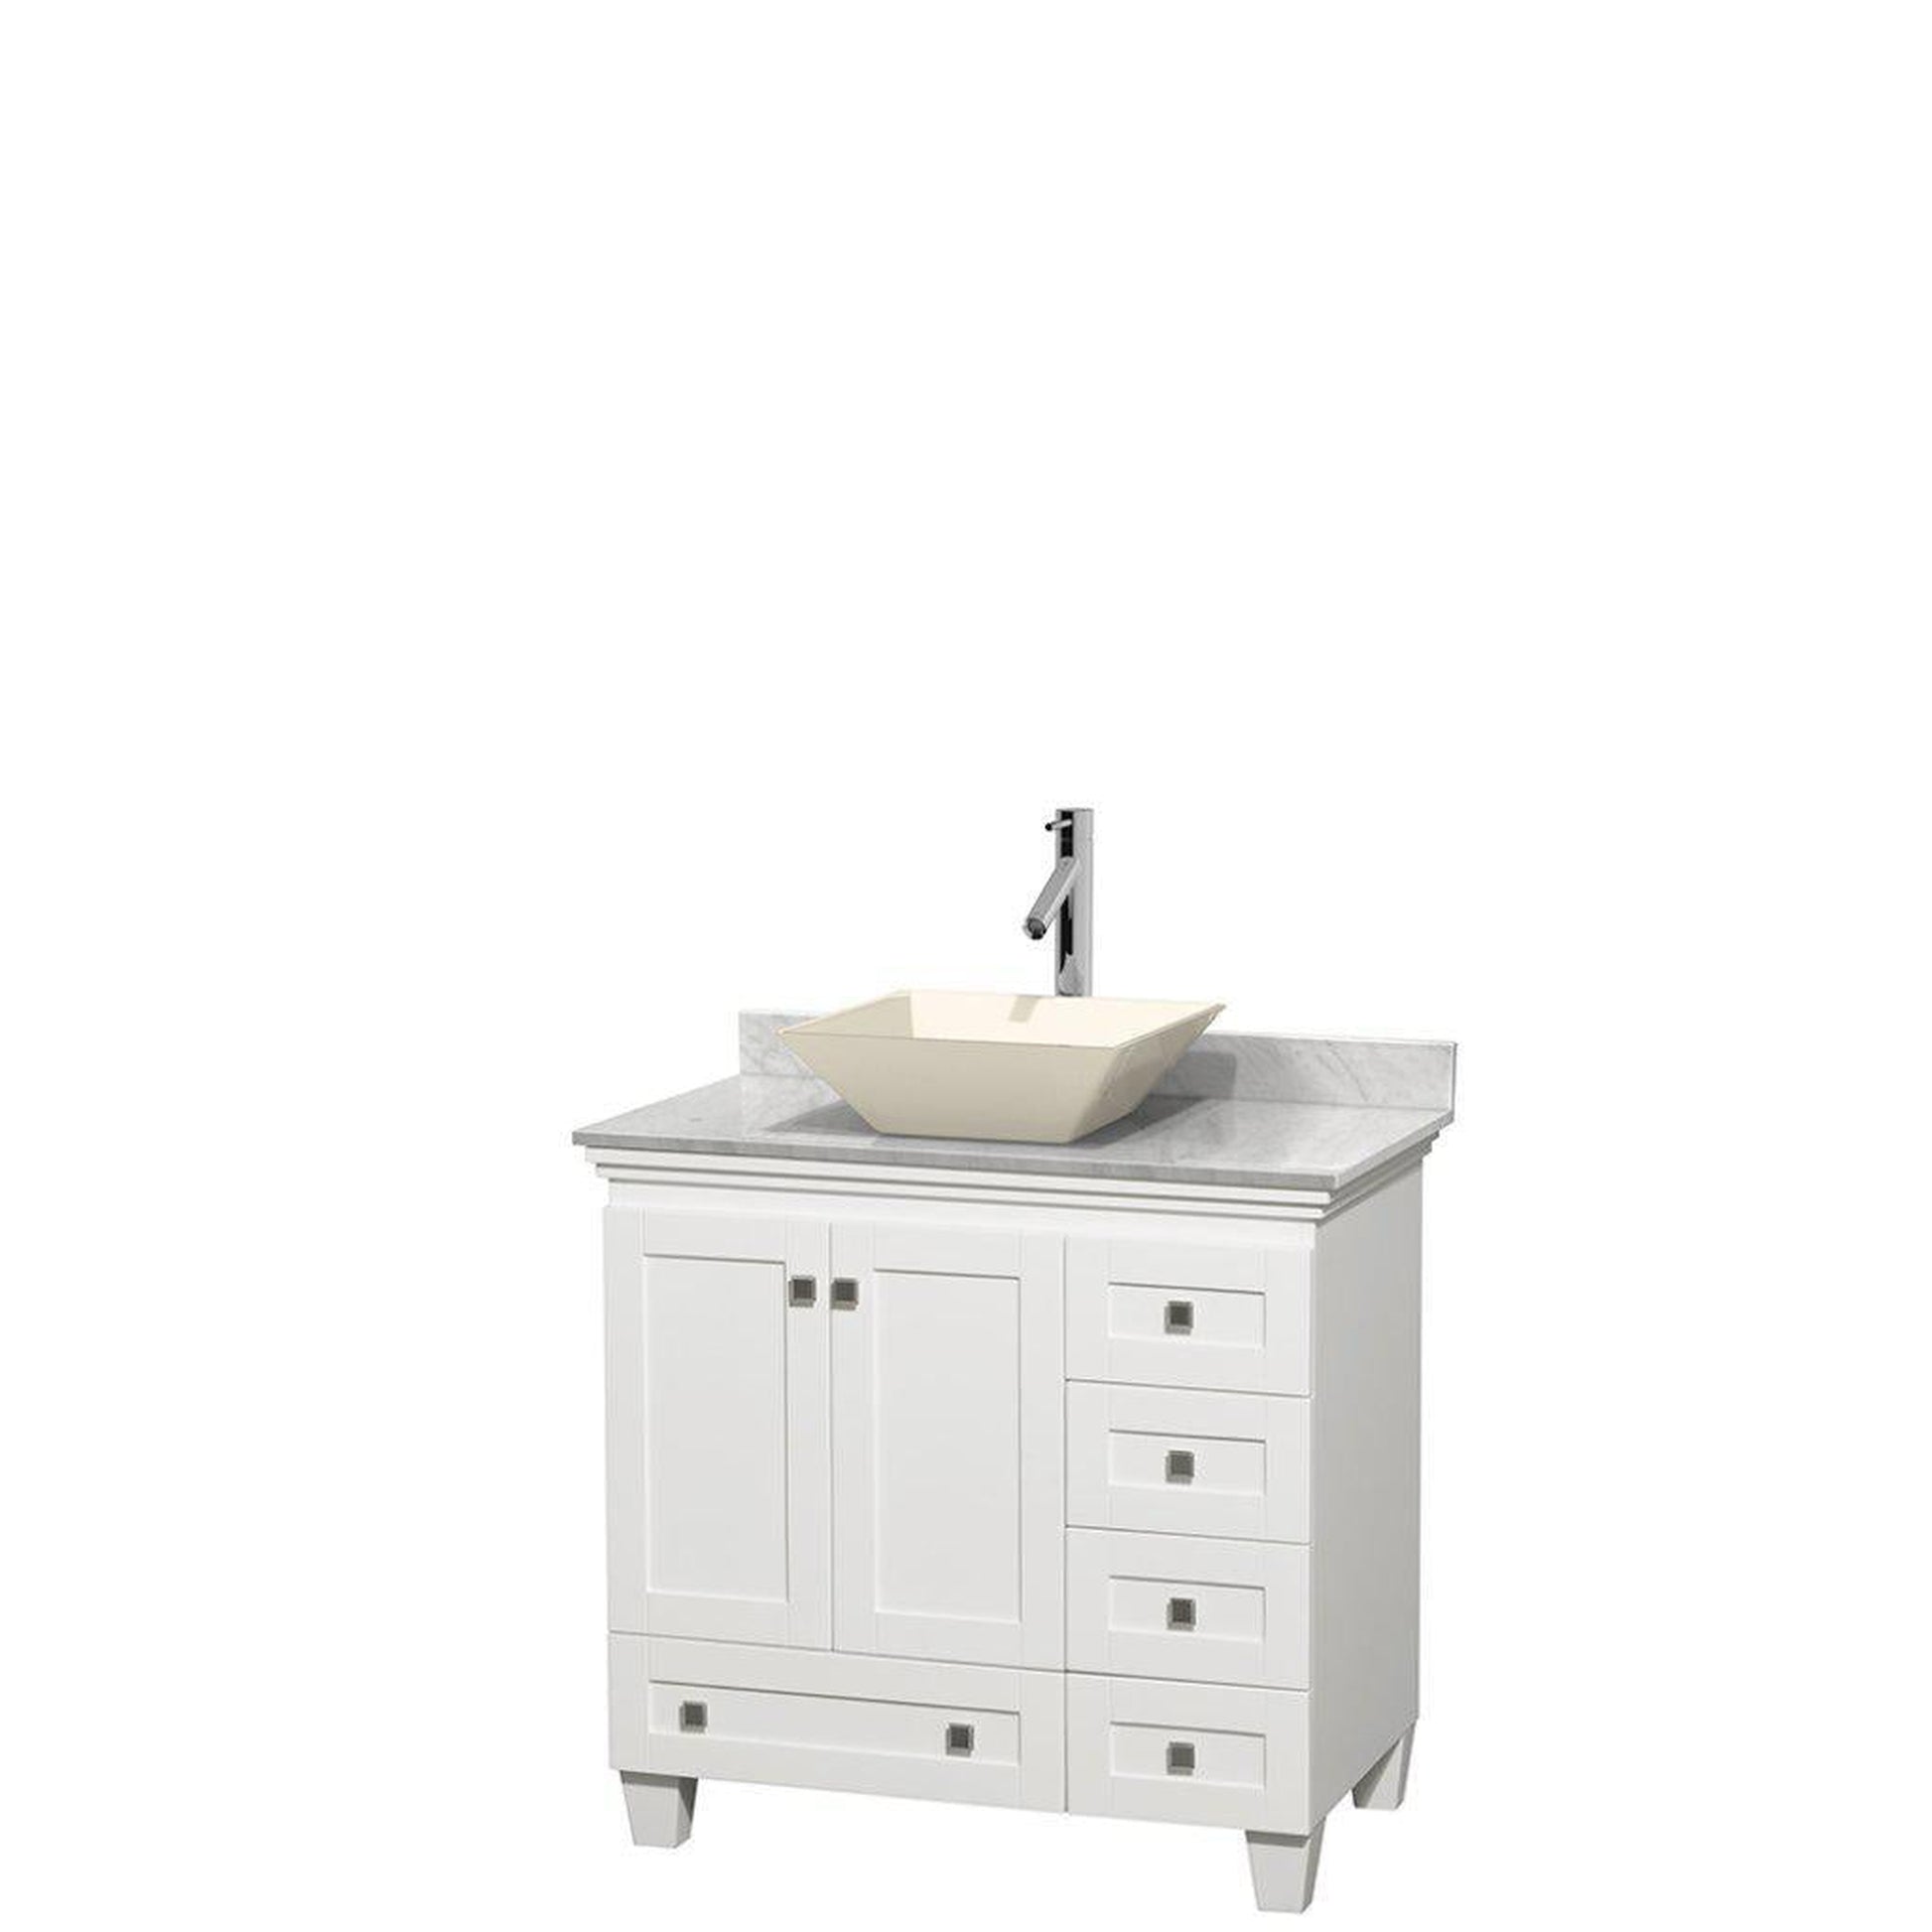 Wyndham Collection Acclaim 36" Single Bathroom White Vanity With White Carrara Marble Countertop And Pyra Bone Porcelain Sink